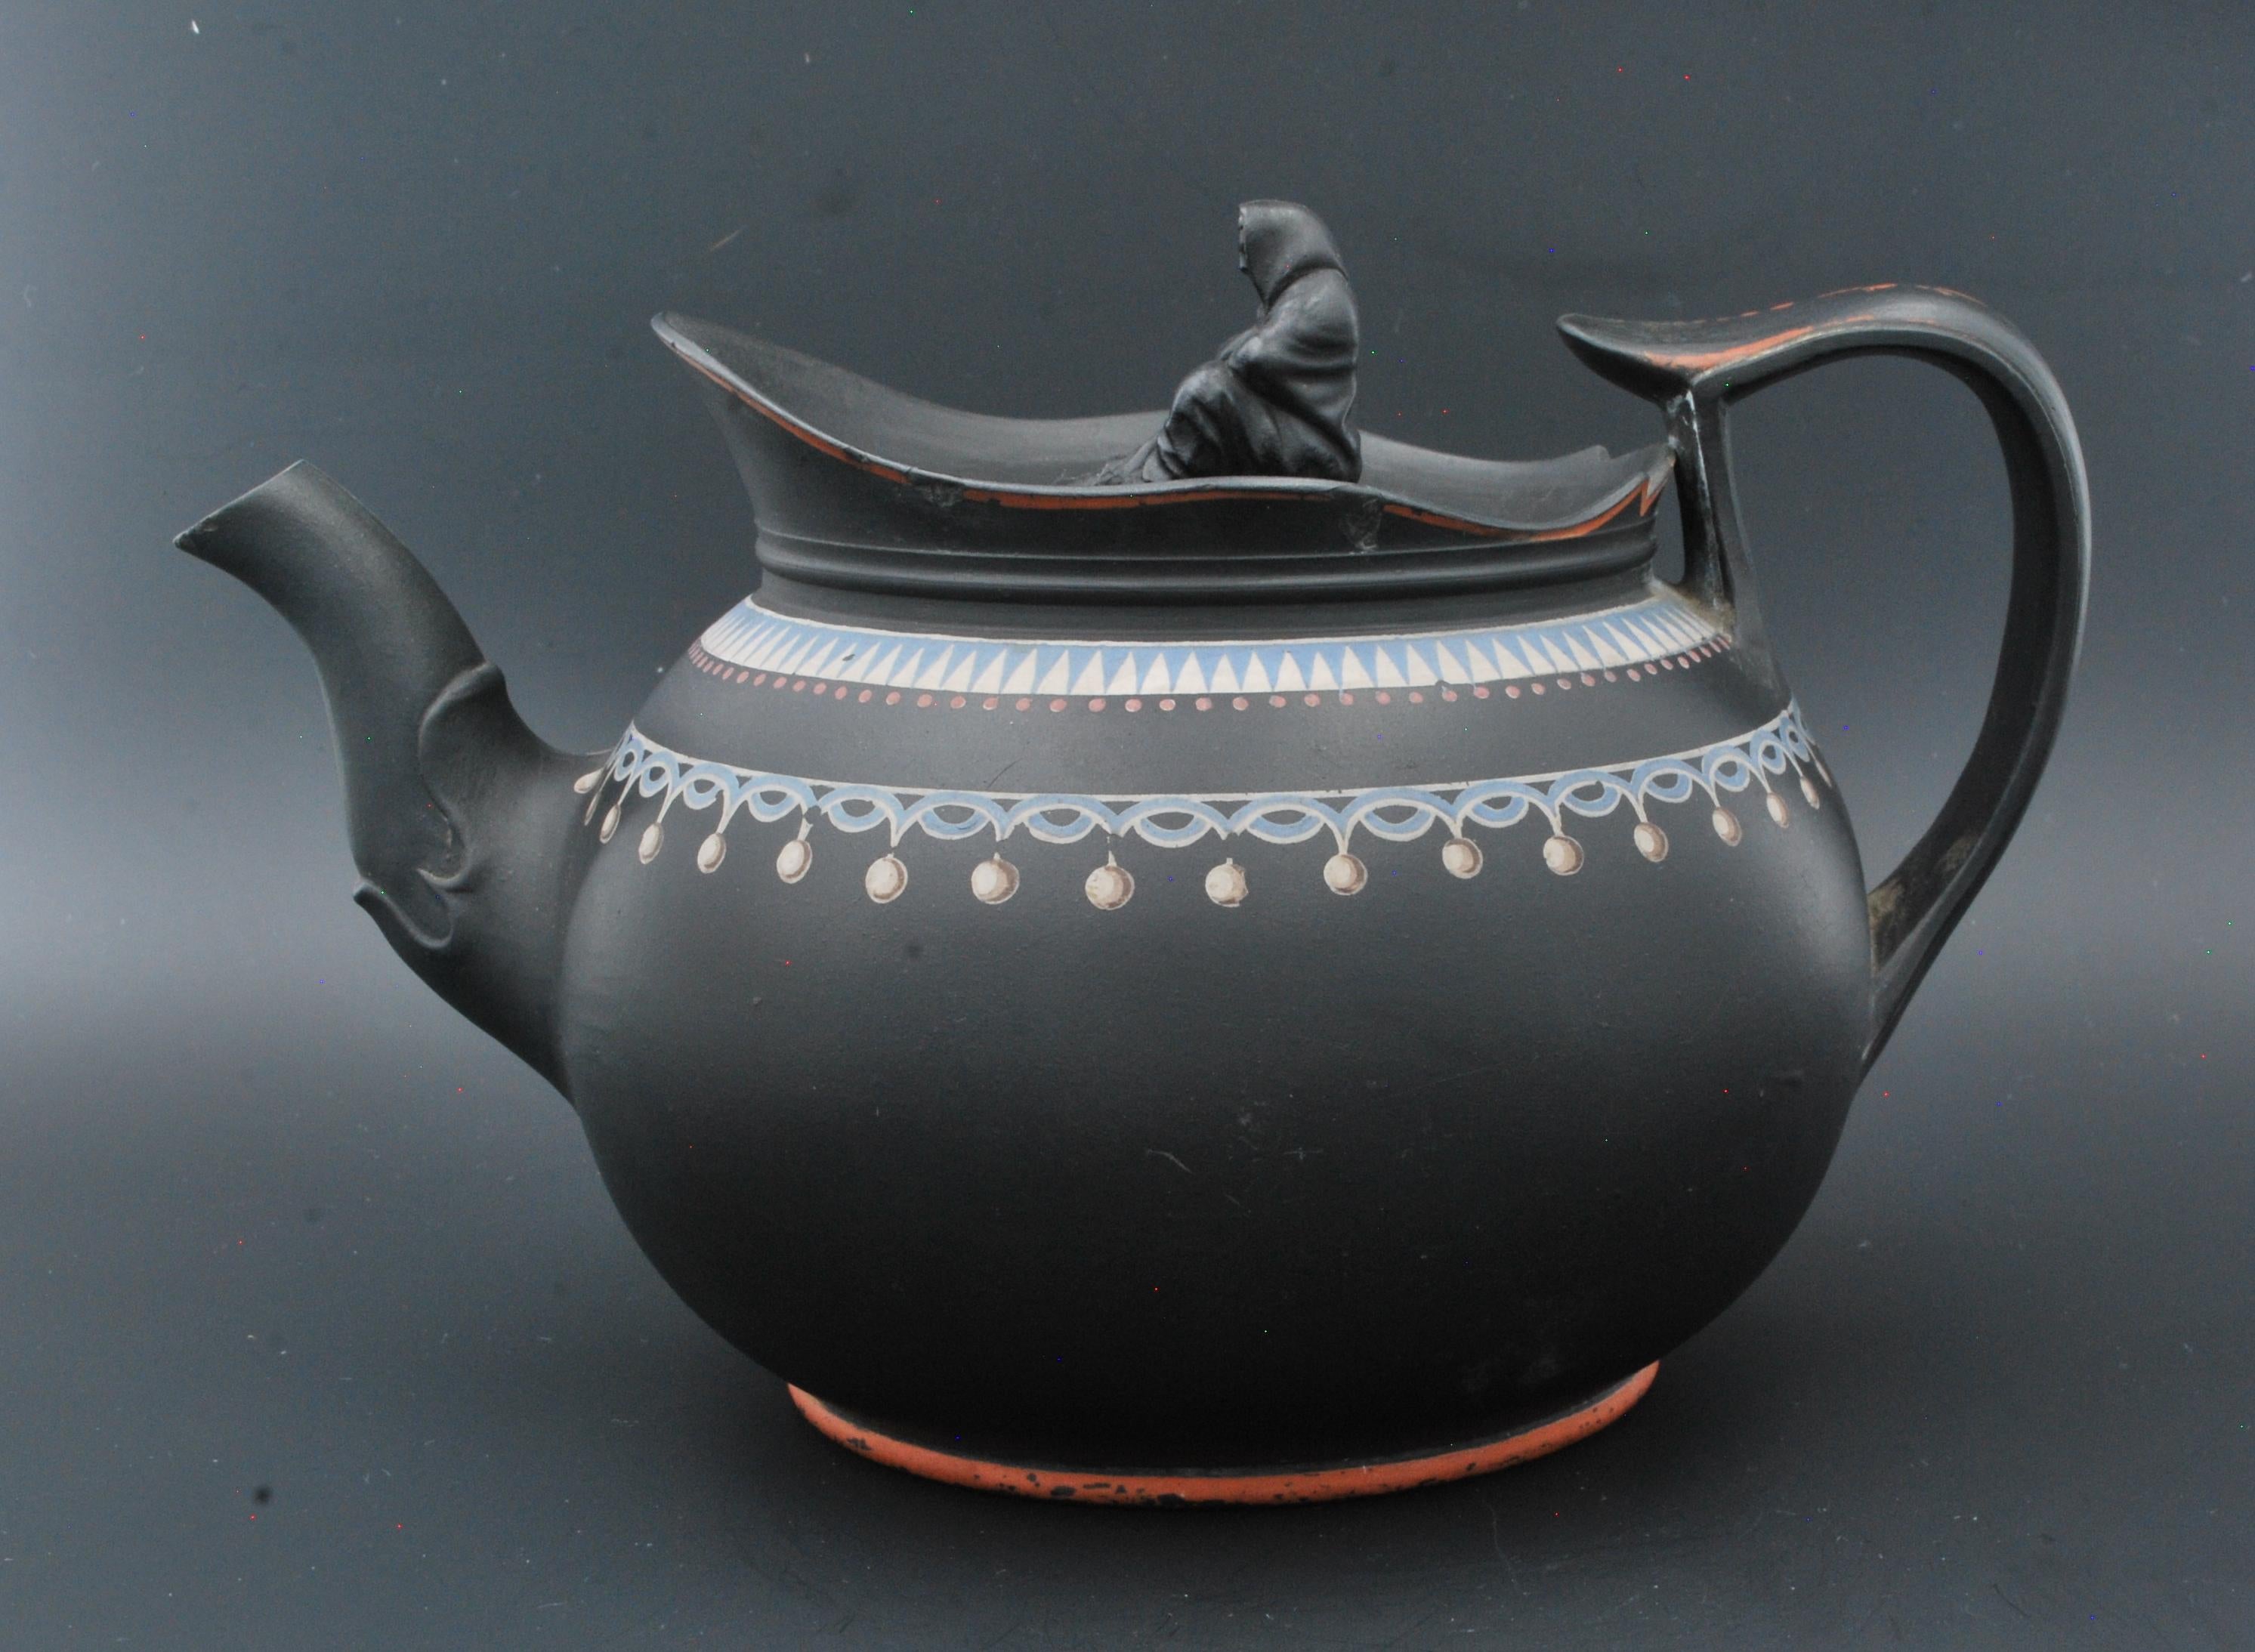 Globular teapot in black basalt, painted with matt white, red and ice blue. Judging by the shape and general appearance, probably by Spode, in imitation of Wedgwood designs of the period.